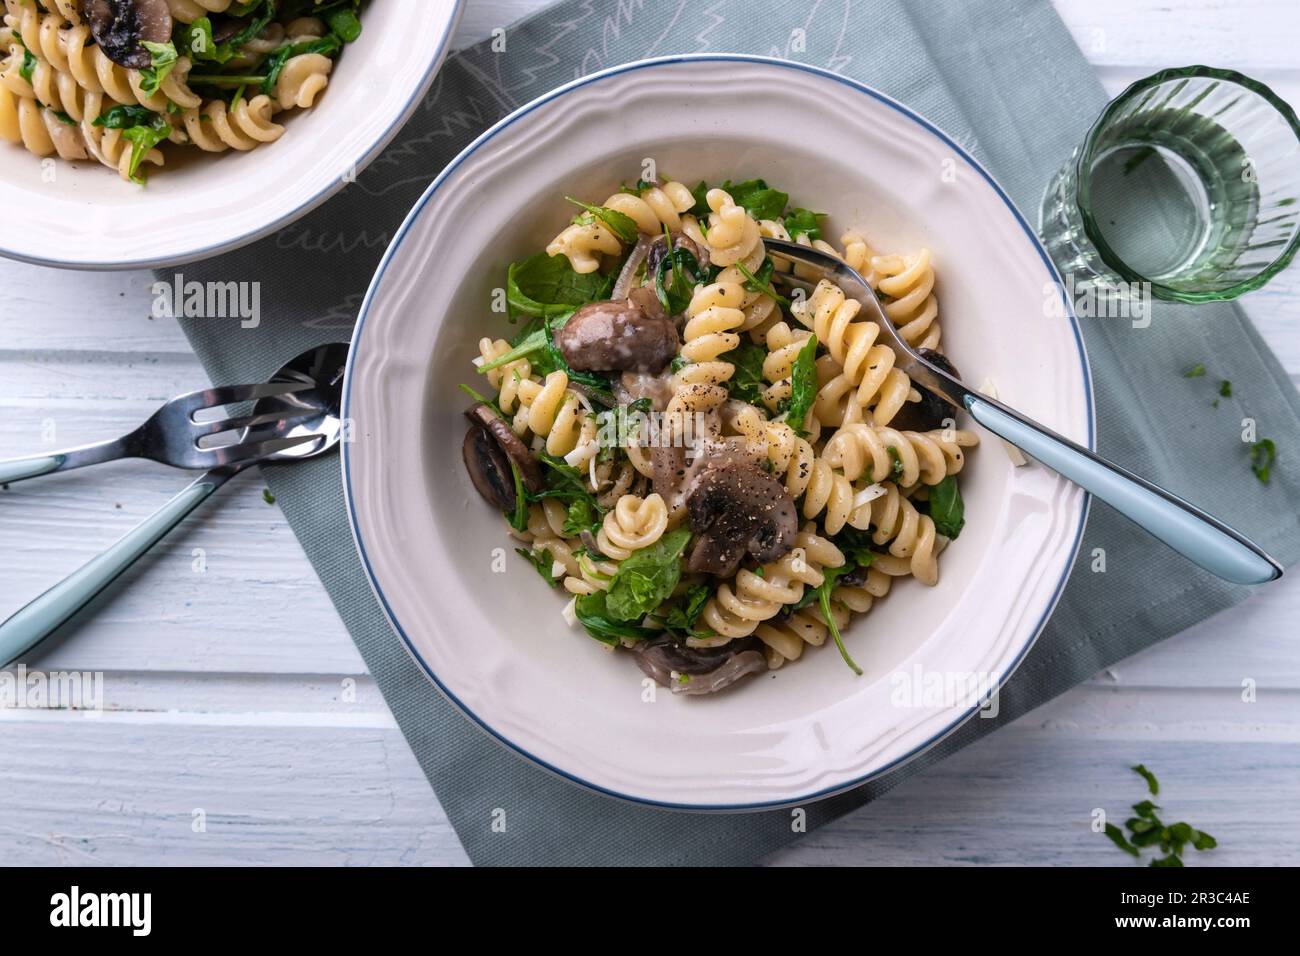 Vegan pasta and mushroom pan with rocket, pine nuts and almond cheese Stock Photo